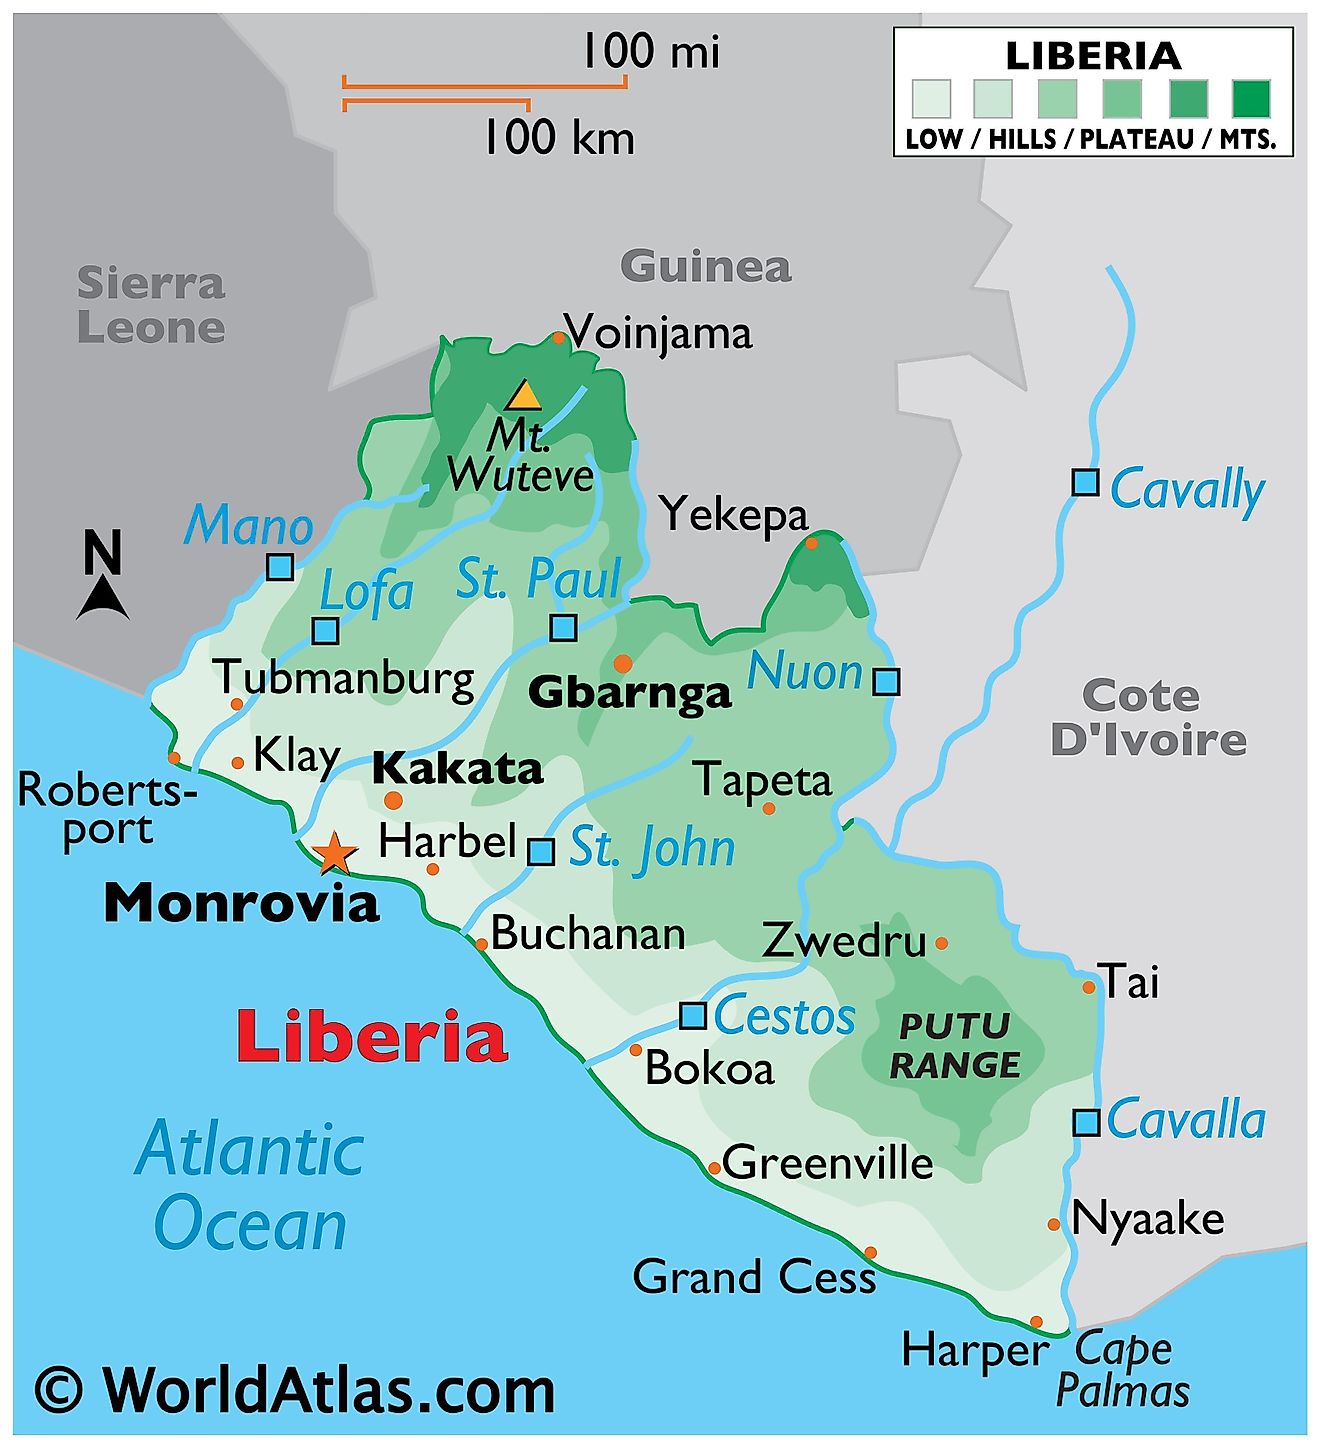 Physical Map of Liberia displaying state boundaries, relief, major rivers, Mount Witeve, and major cities.